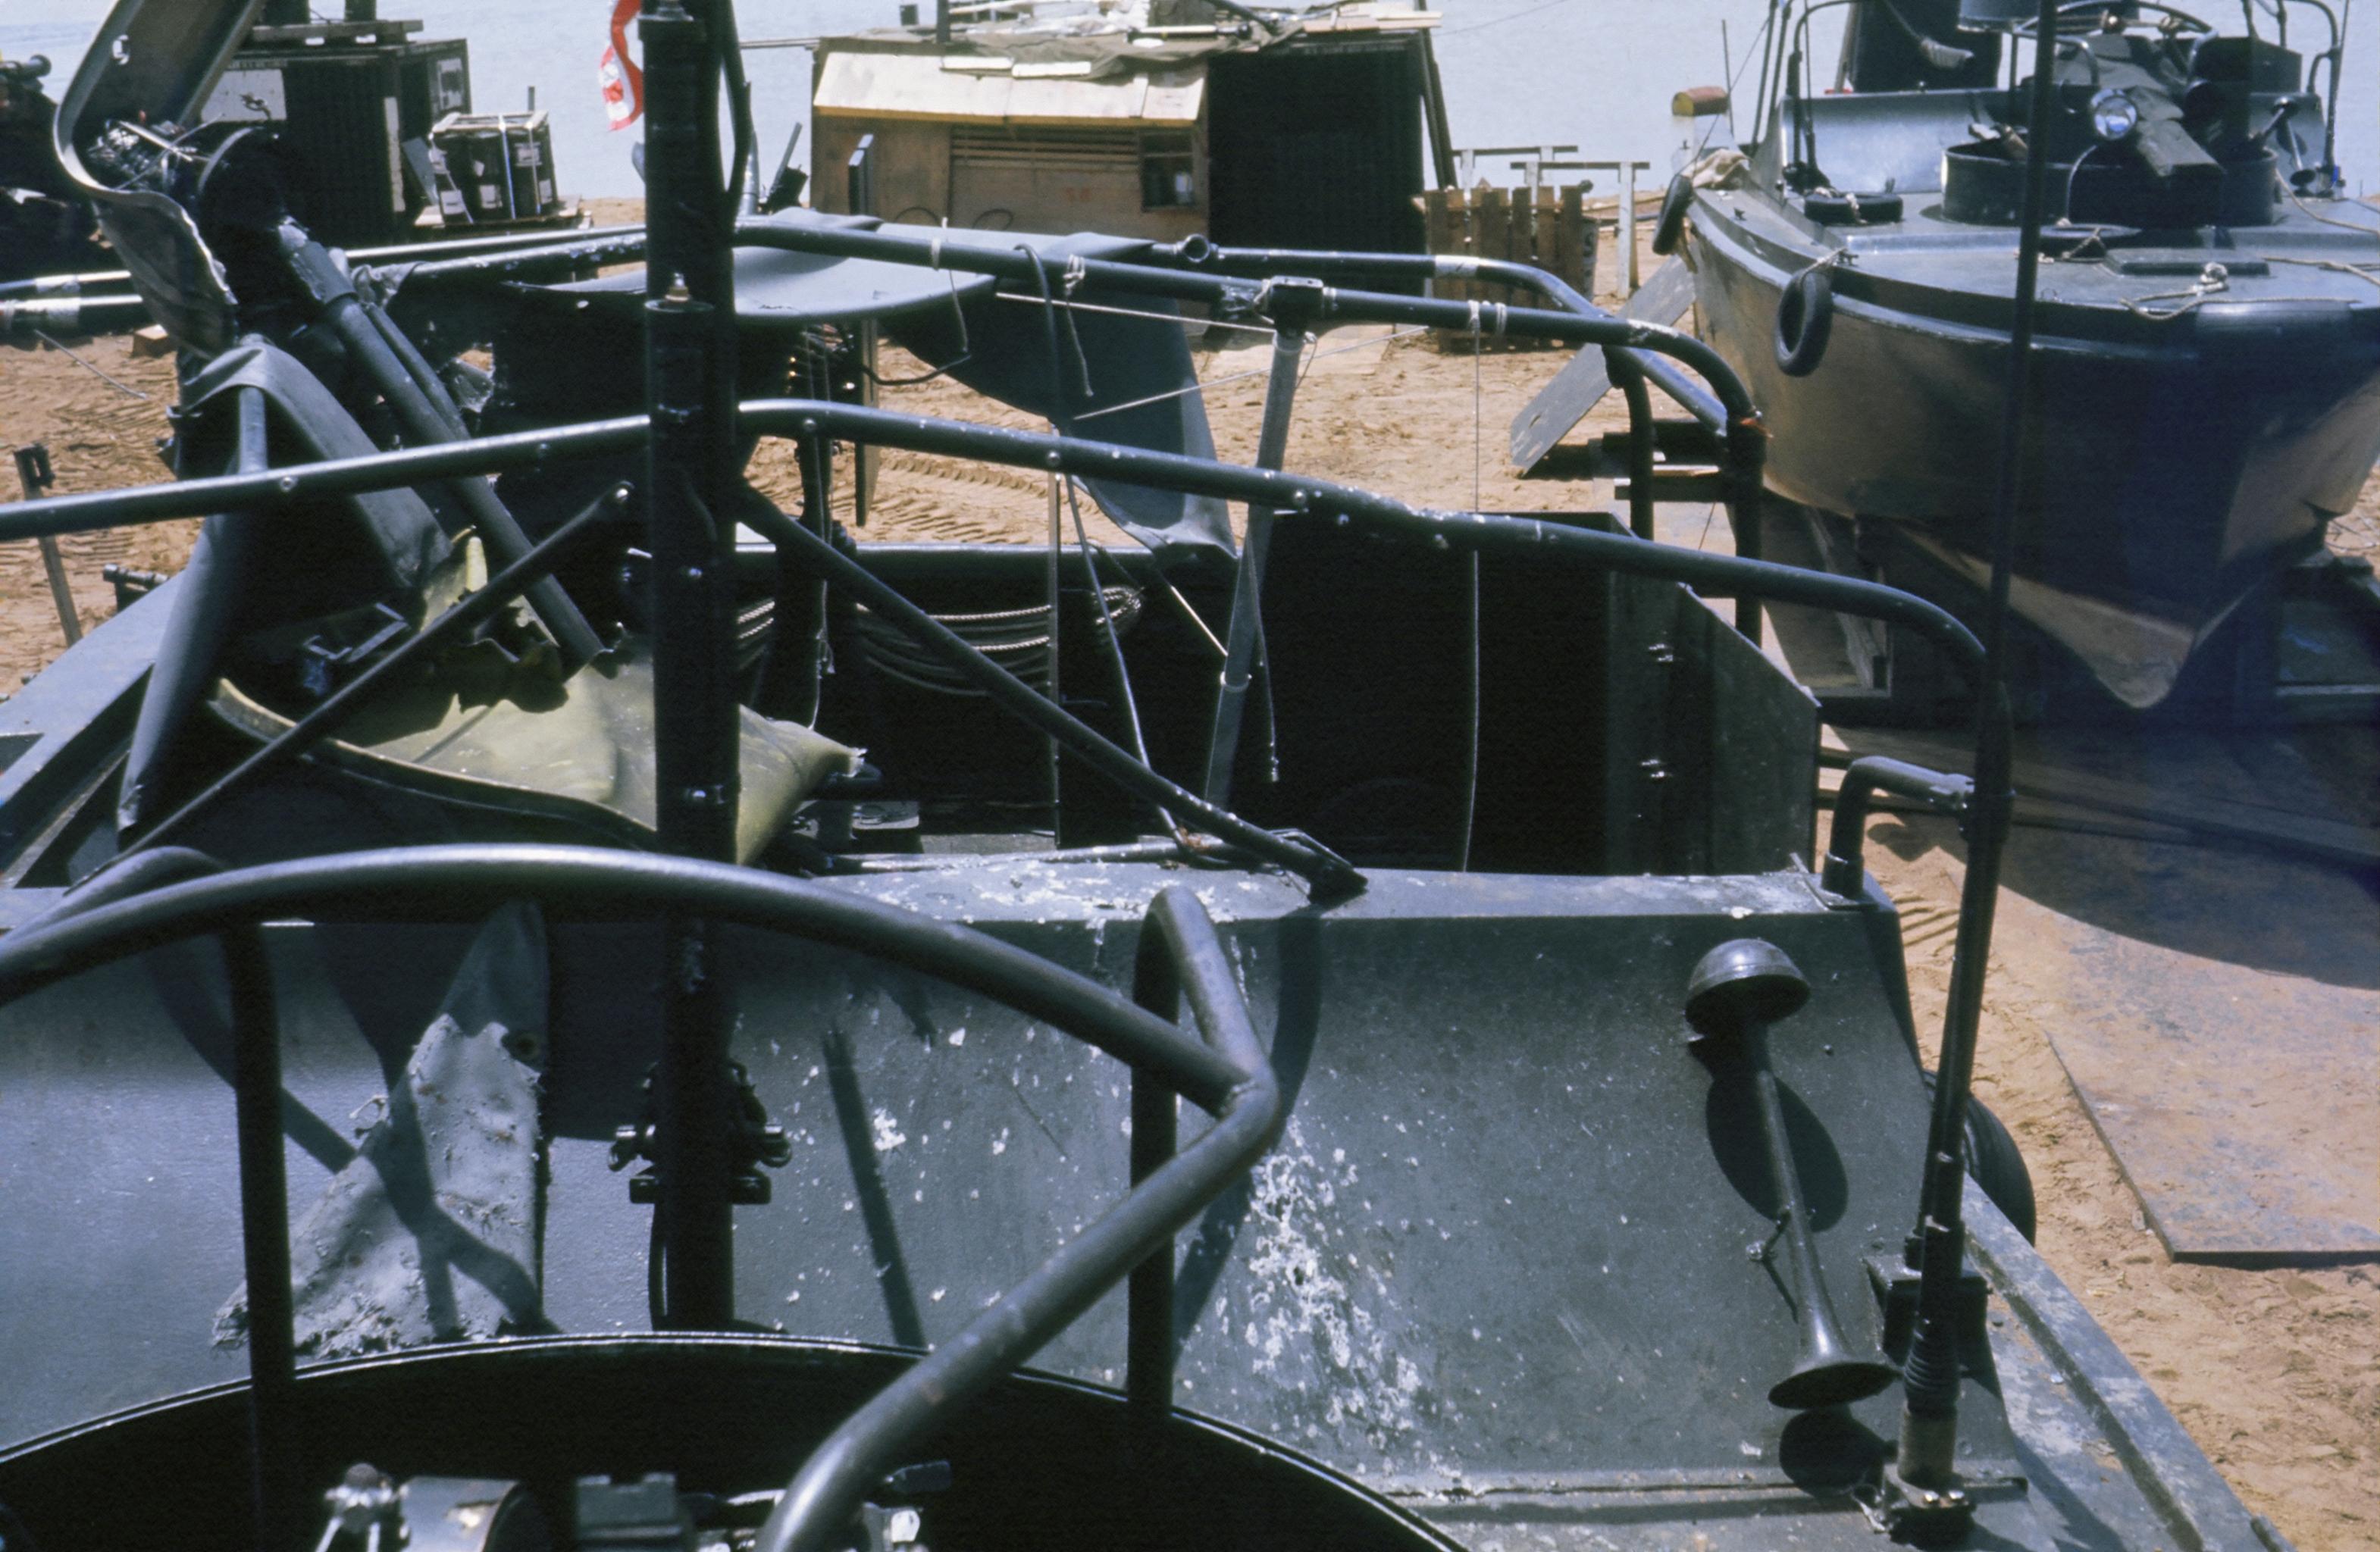 My boat after fire fight June 1967